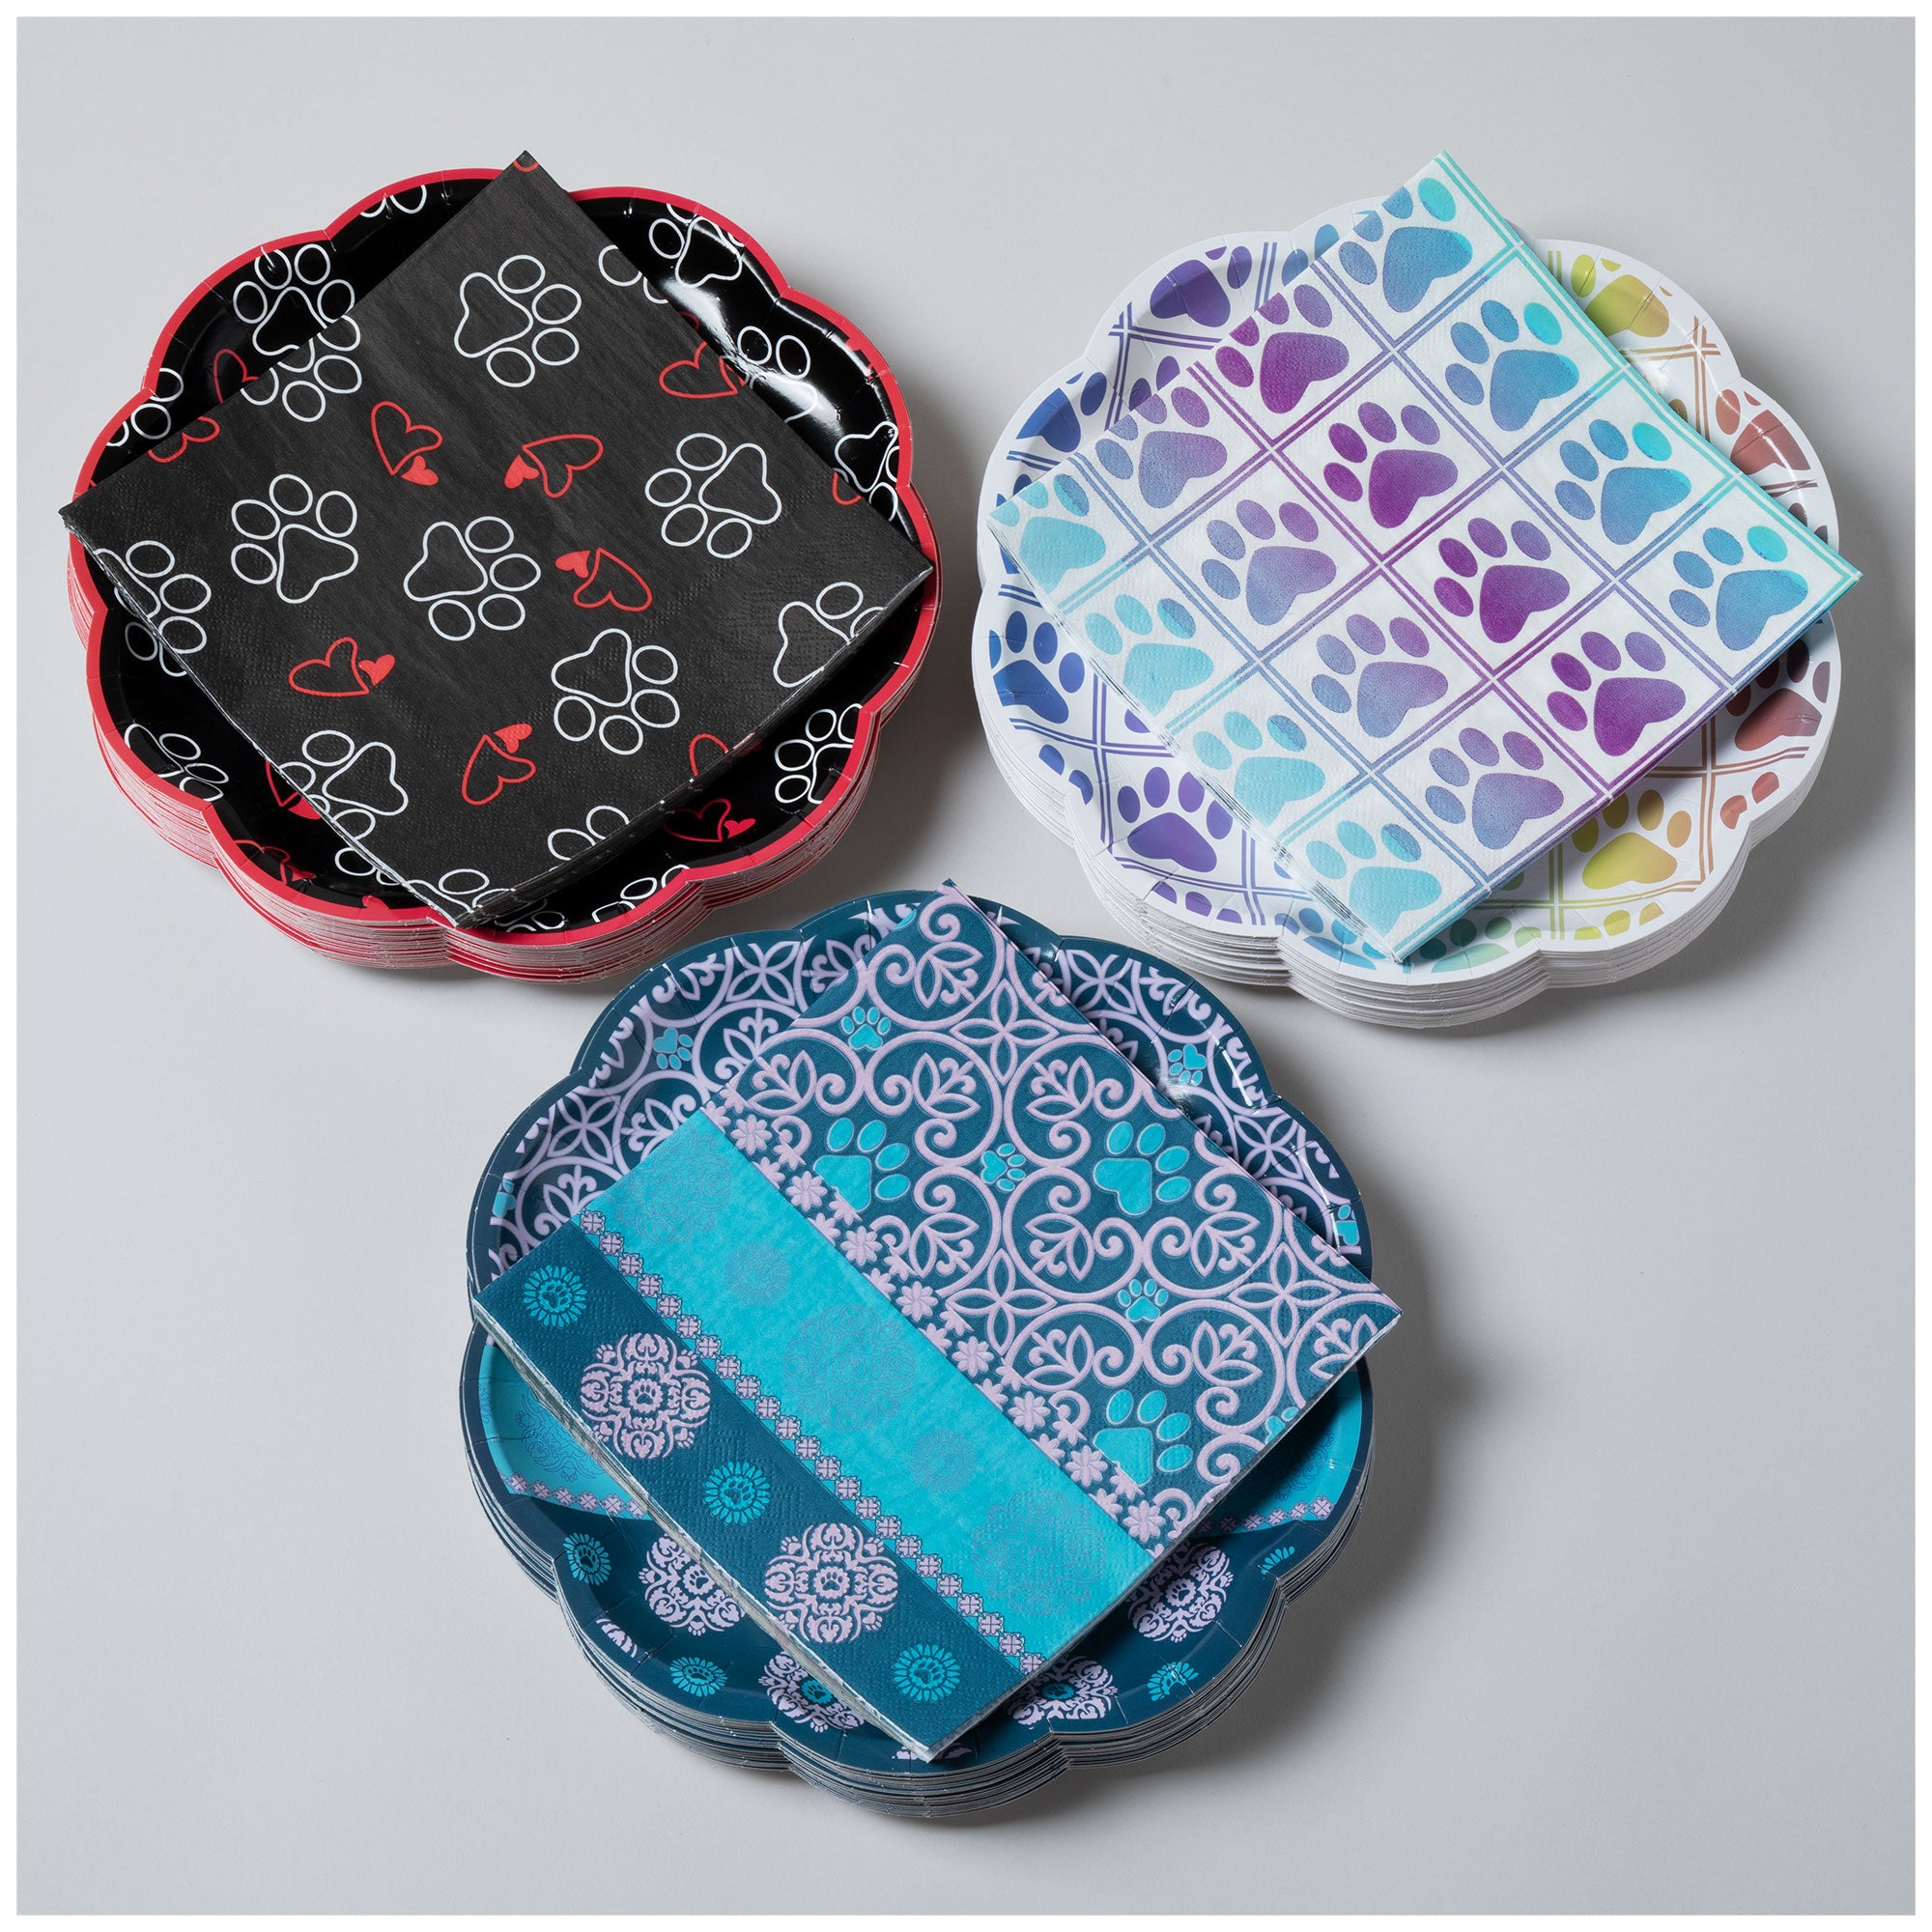 Pawfect Occasion Paper Plates & Napkins - Rainbow Checkered Paws - Napkins & Plates